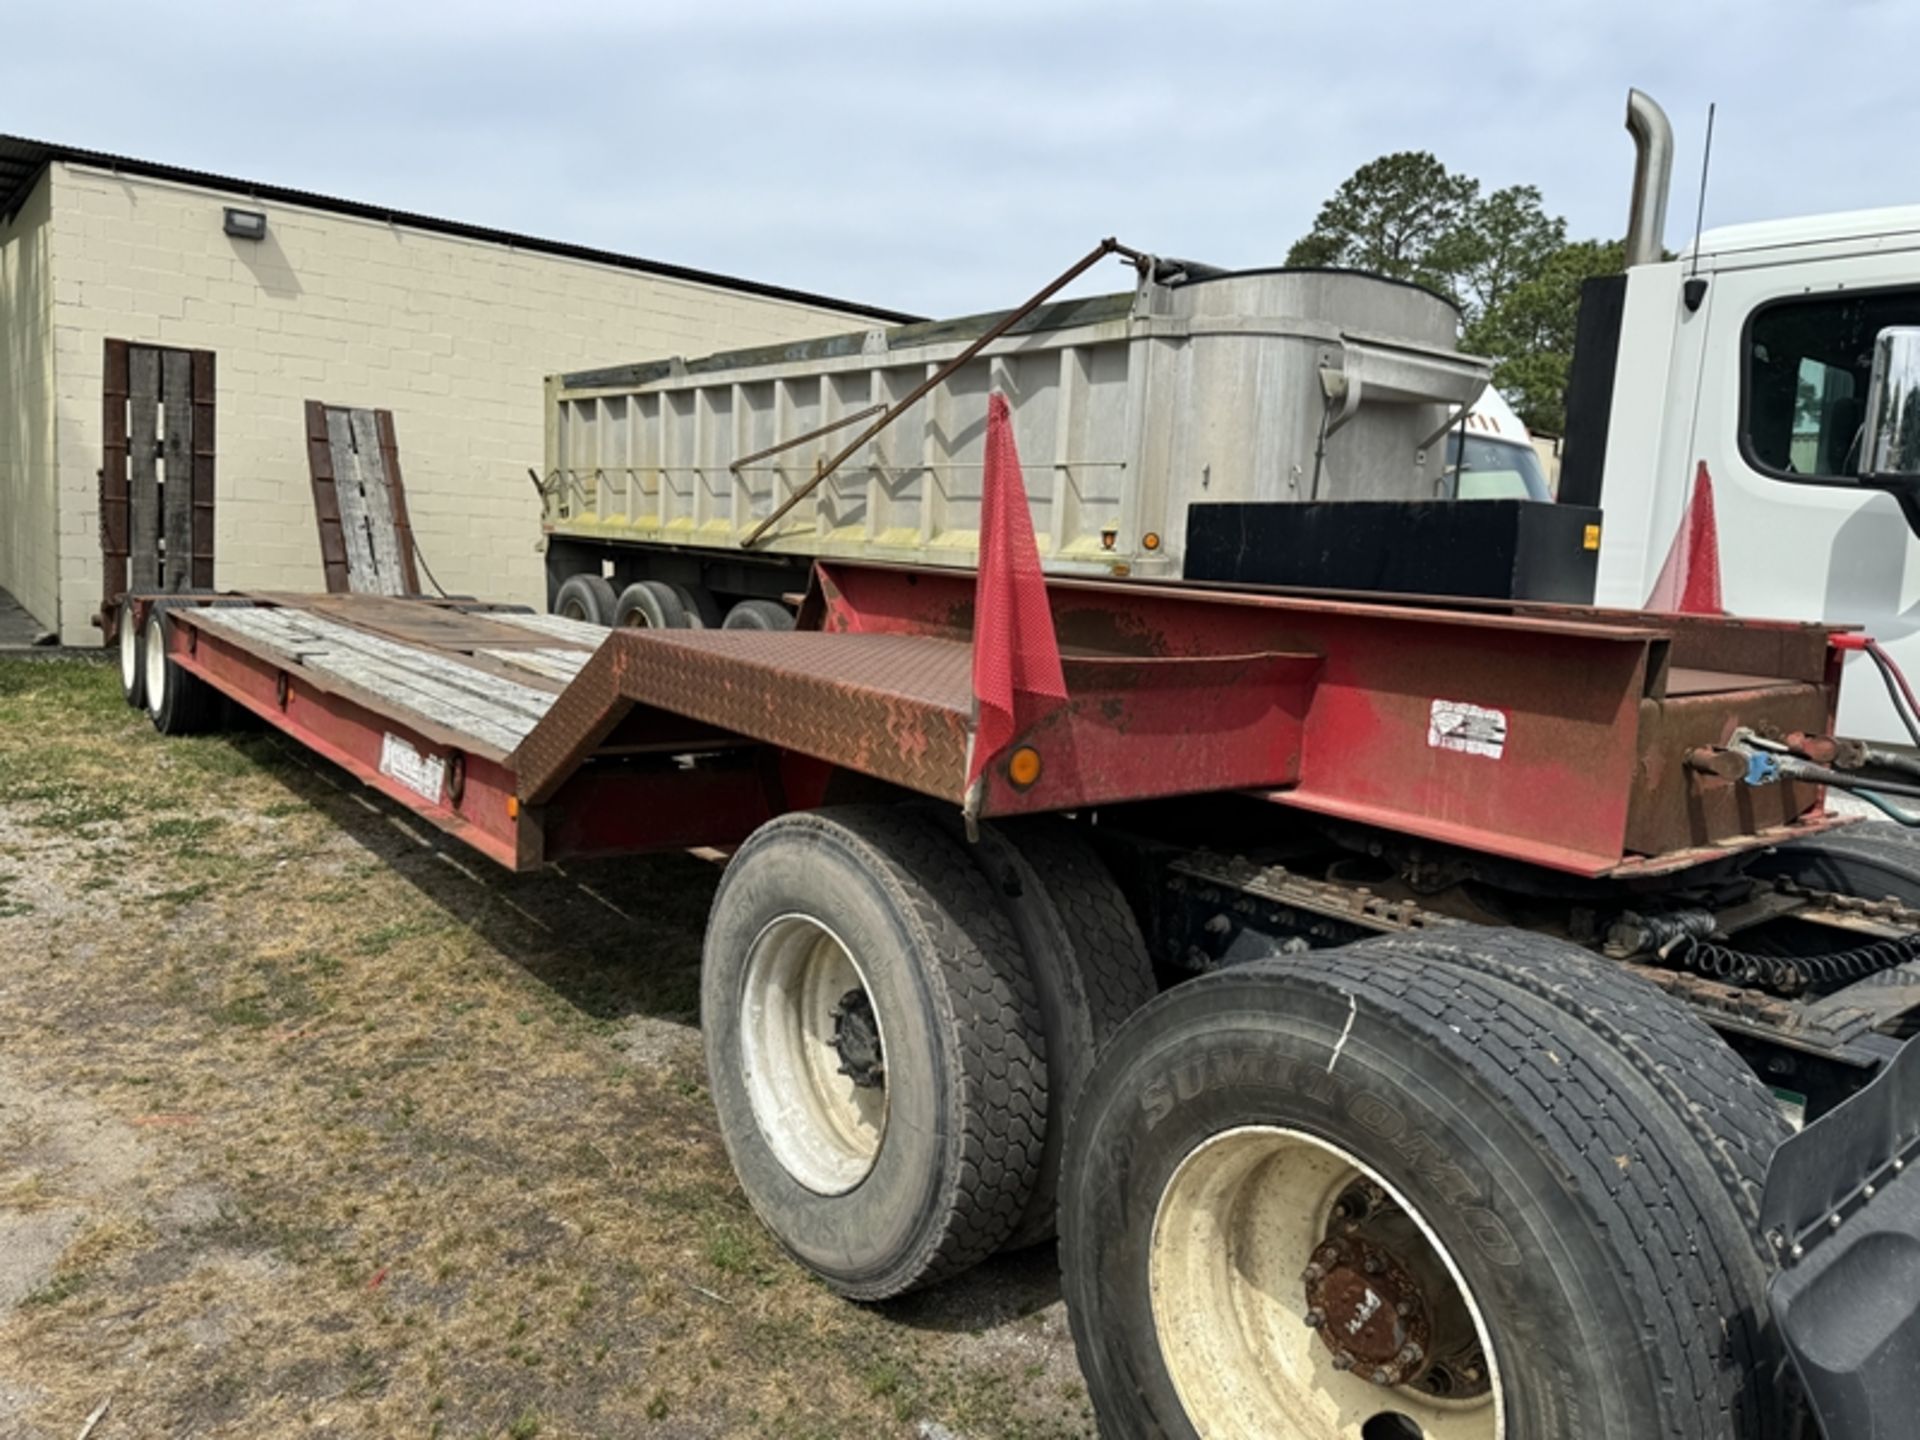 1992 ROGERS 20' flat deck 35-ton lowboy trailer with hyd ramps - 1RBH39207NAR21641 - Image 2 of 5